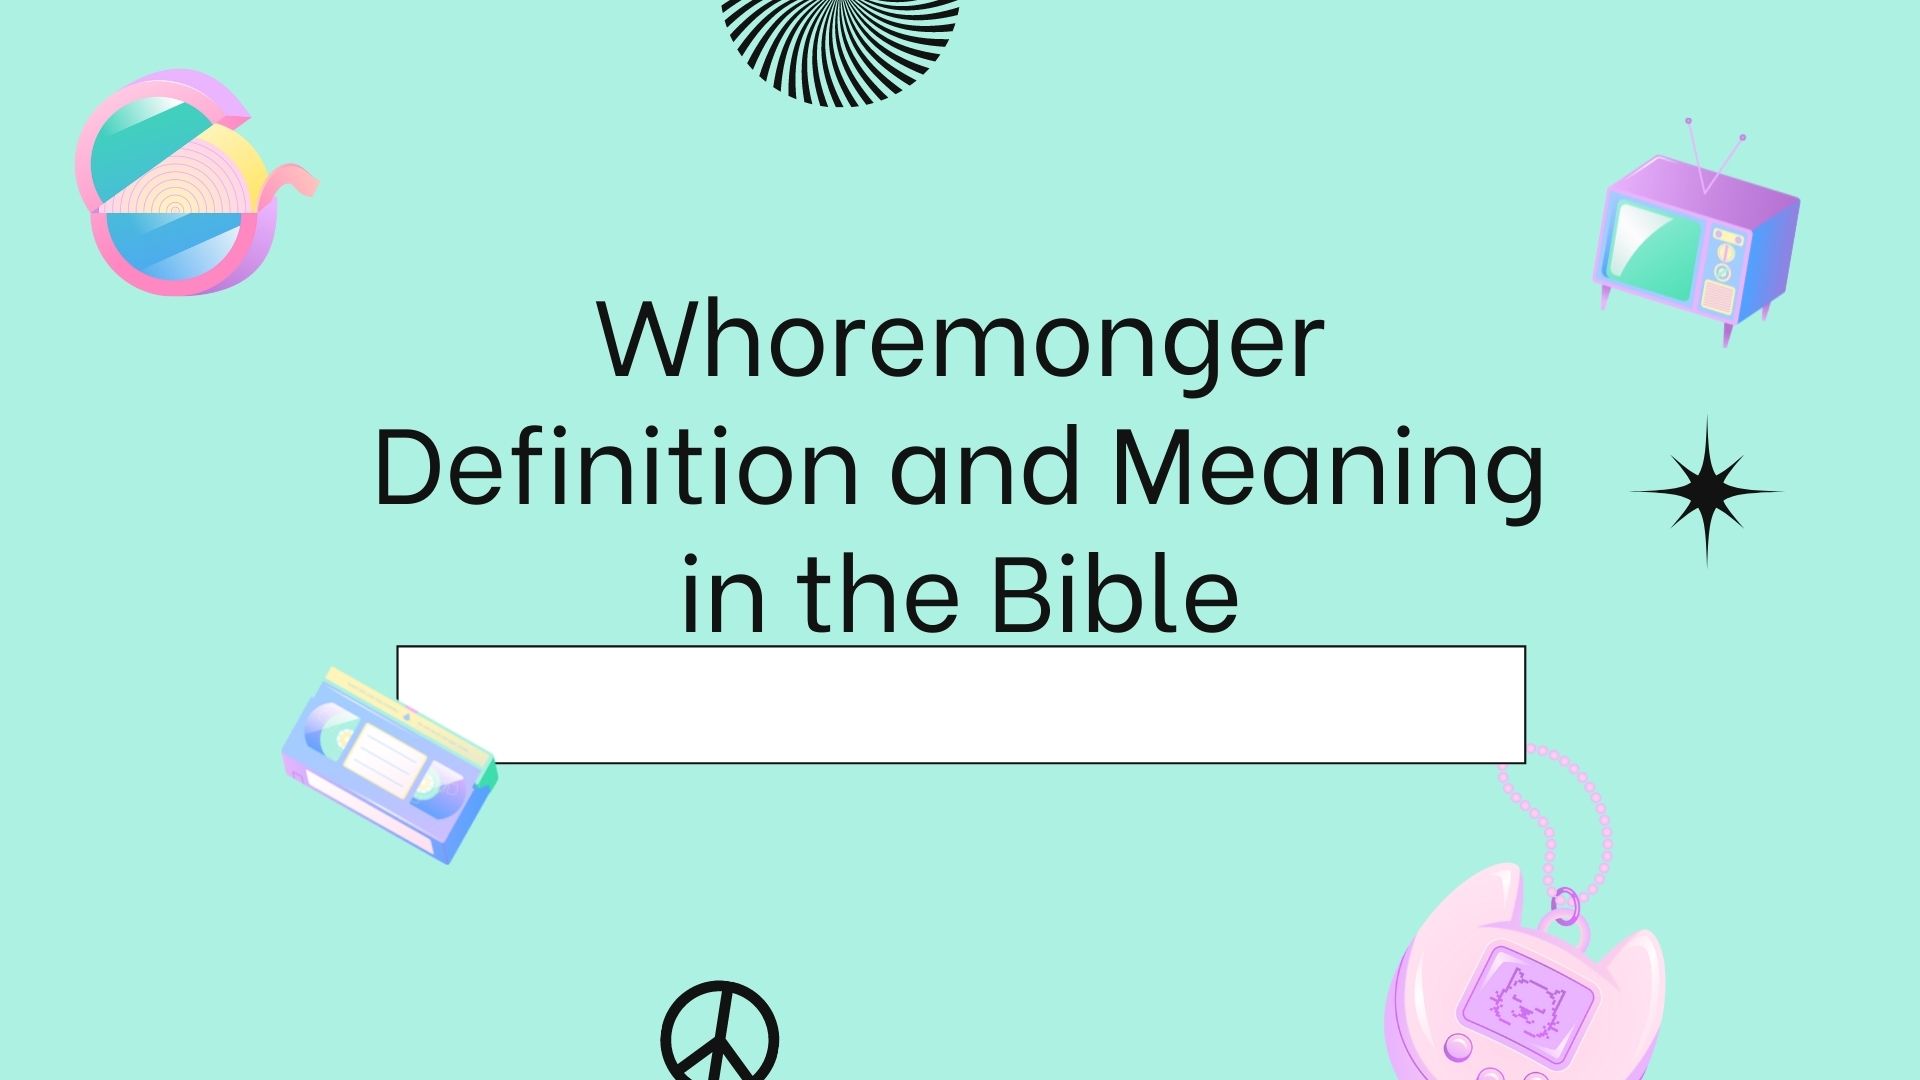 Whoremonger in the Bible